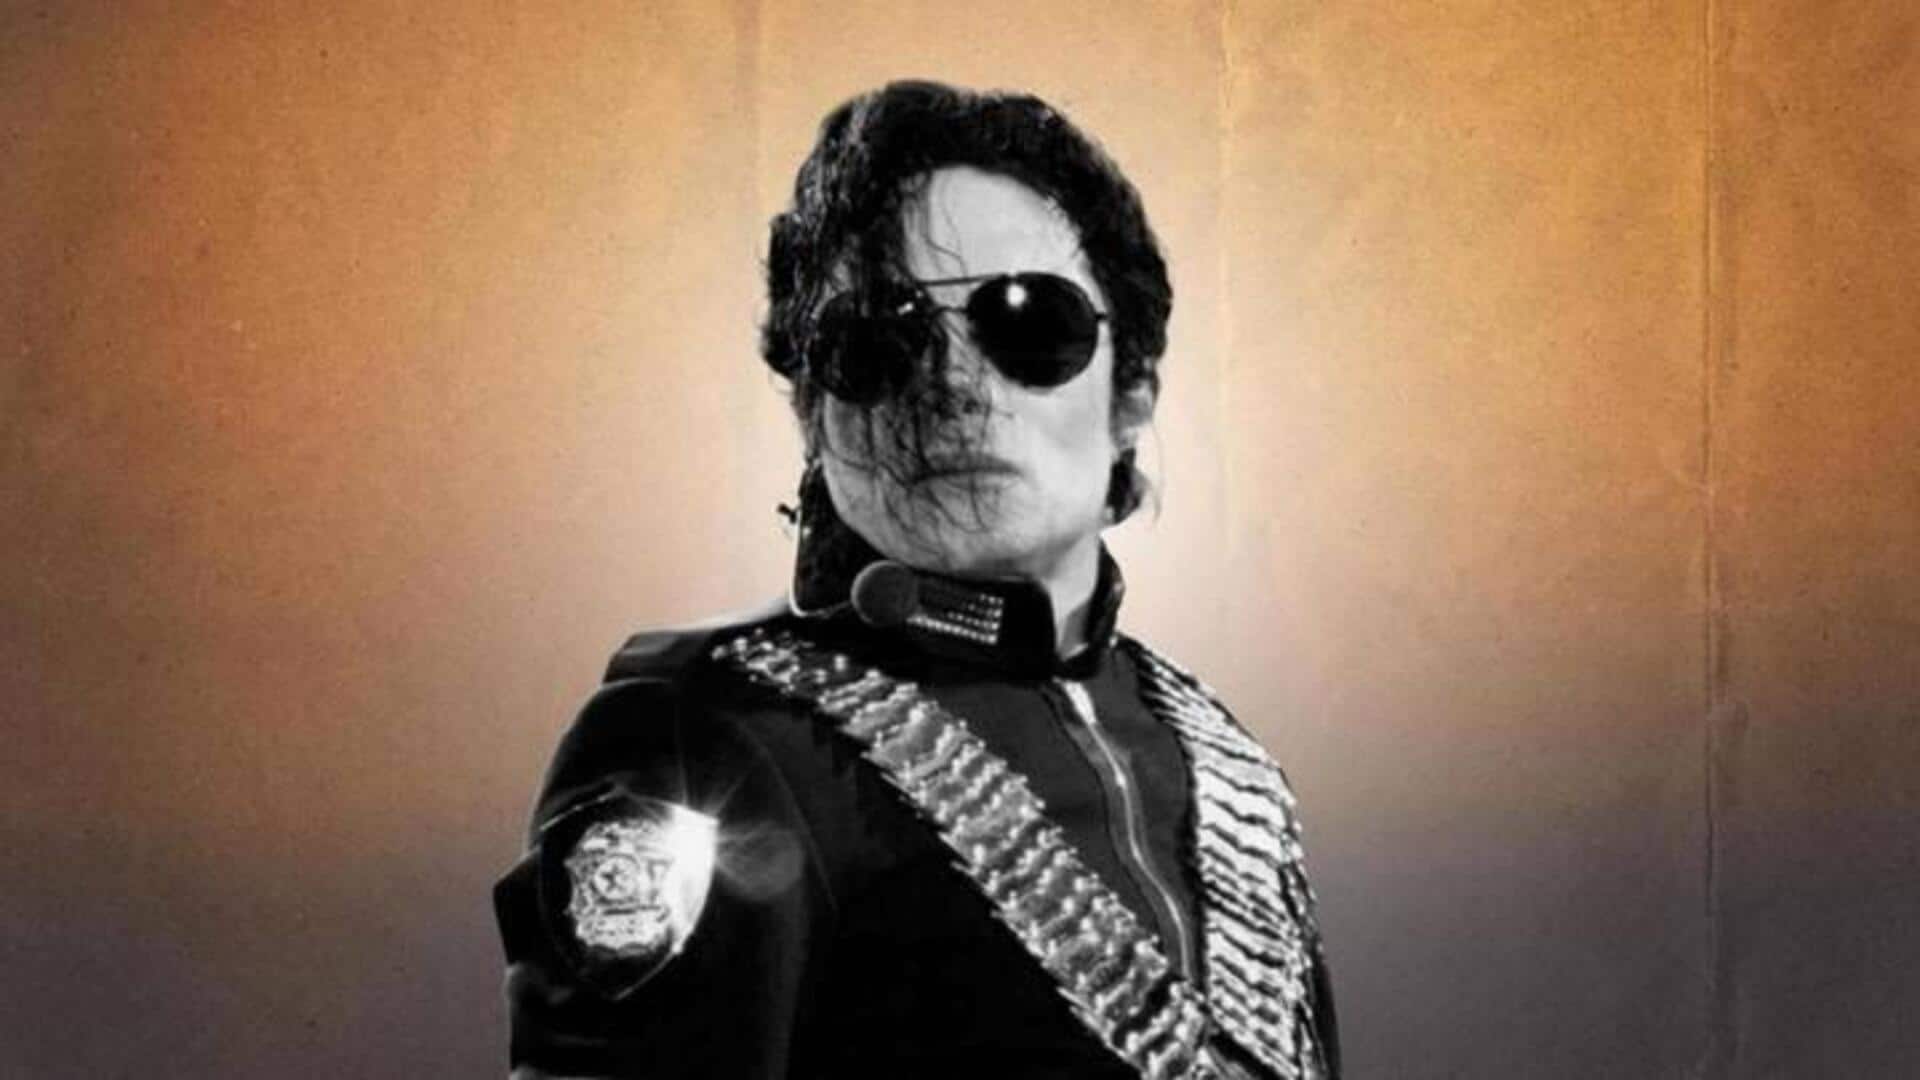 Michael Jackson's mother Katherine's wealth exceeds $55M following his death